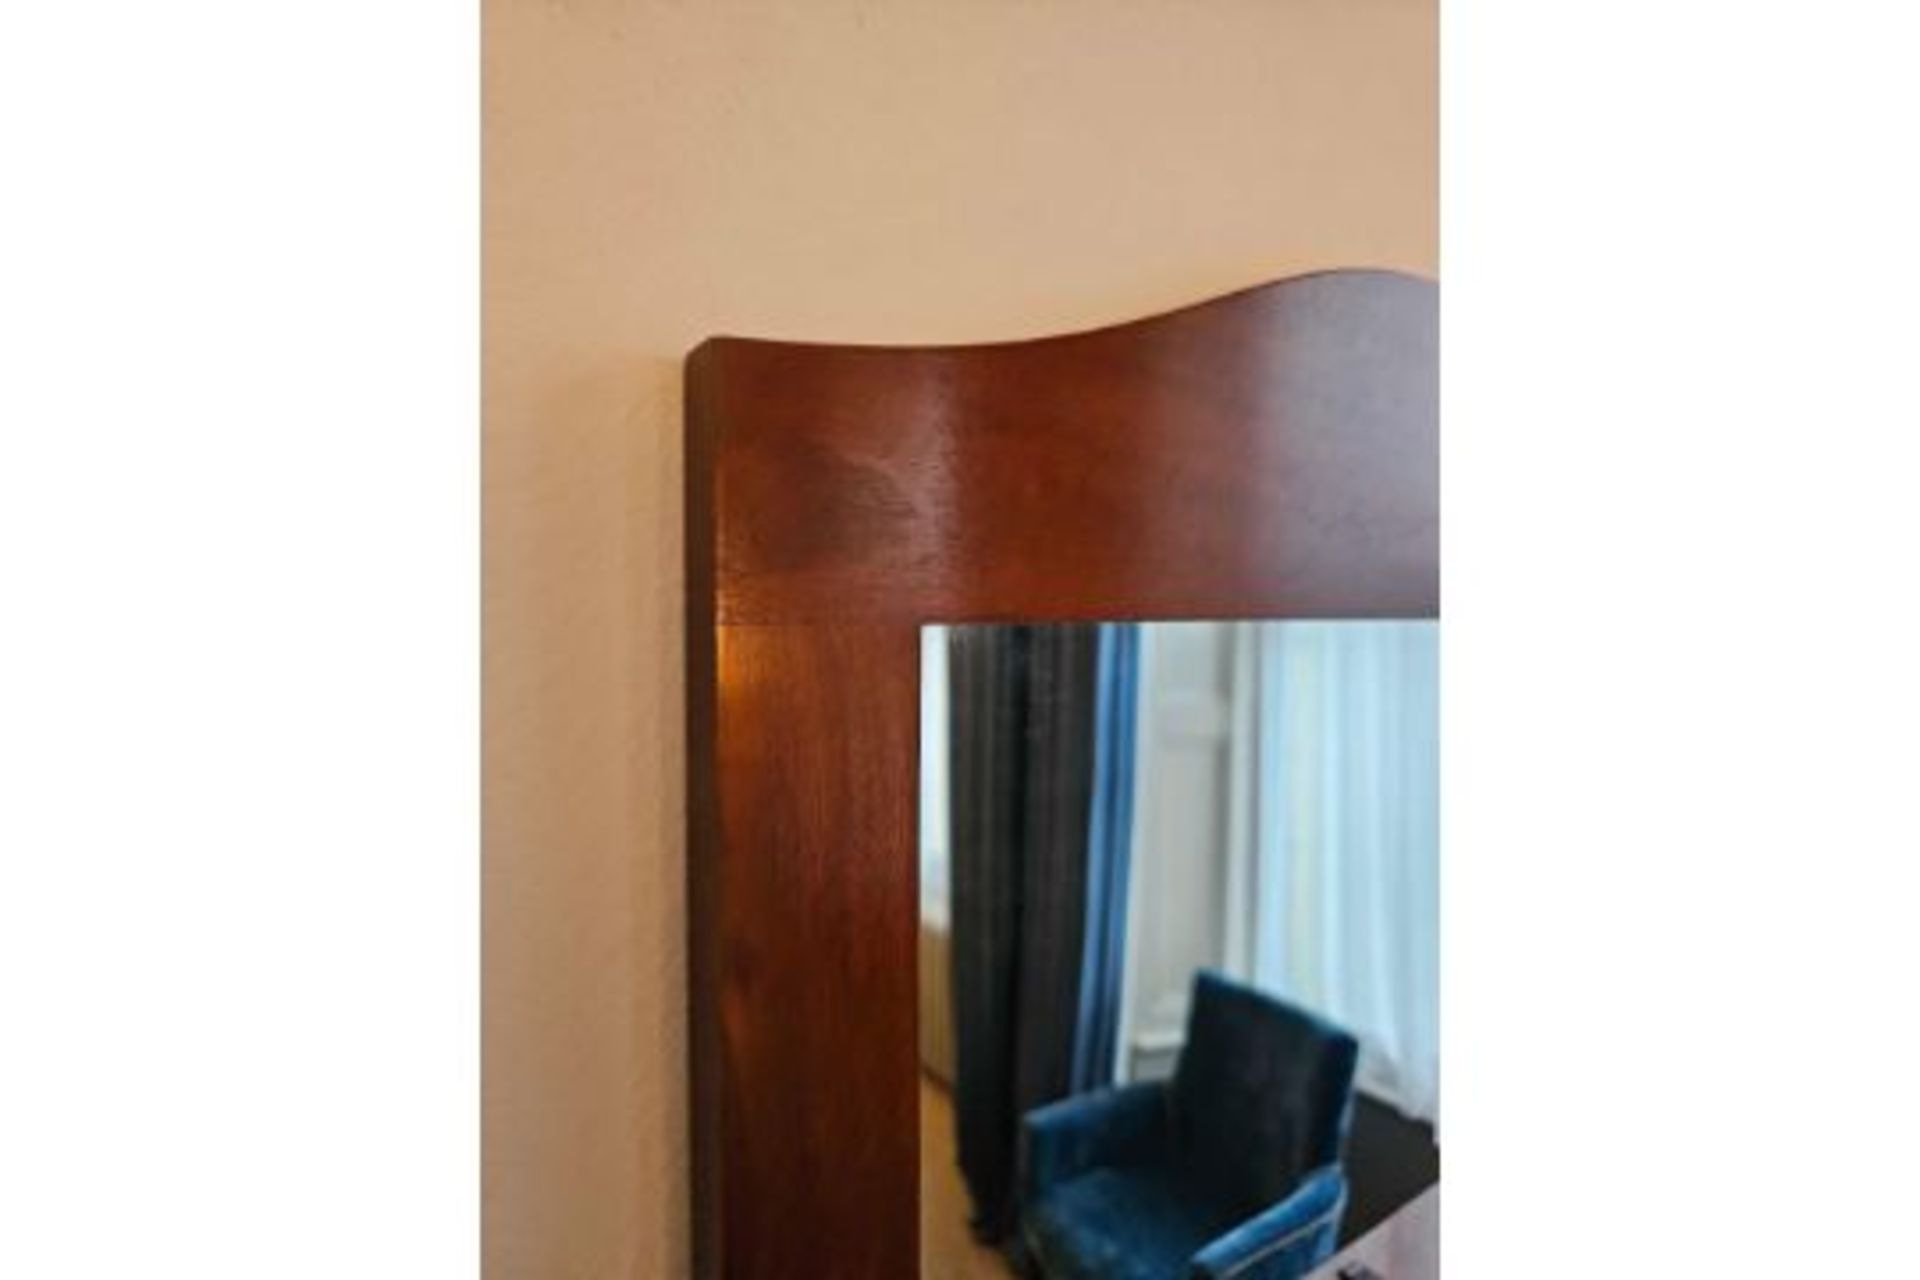 Mahogany Accent Mirror A Simple Shaped Frame With Dome Top Feature 60 x 80cm - Image 2 of 2